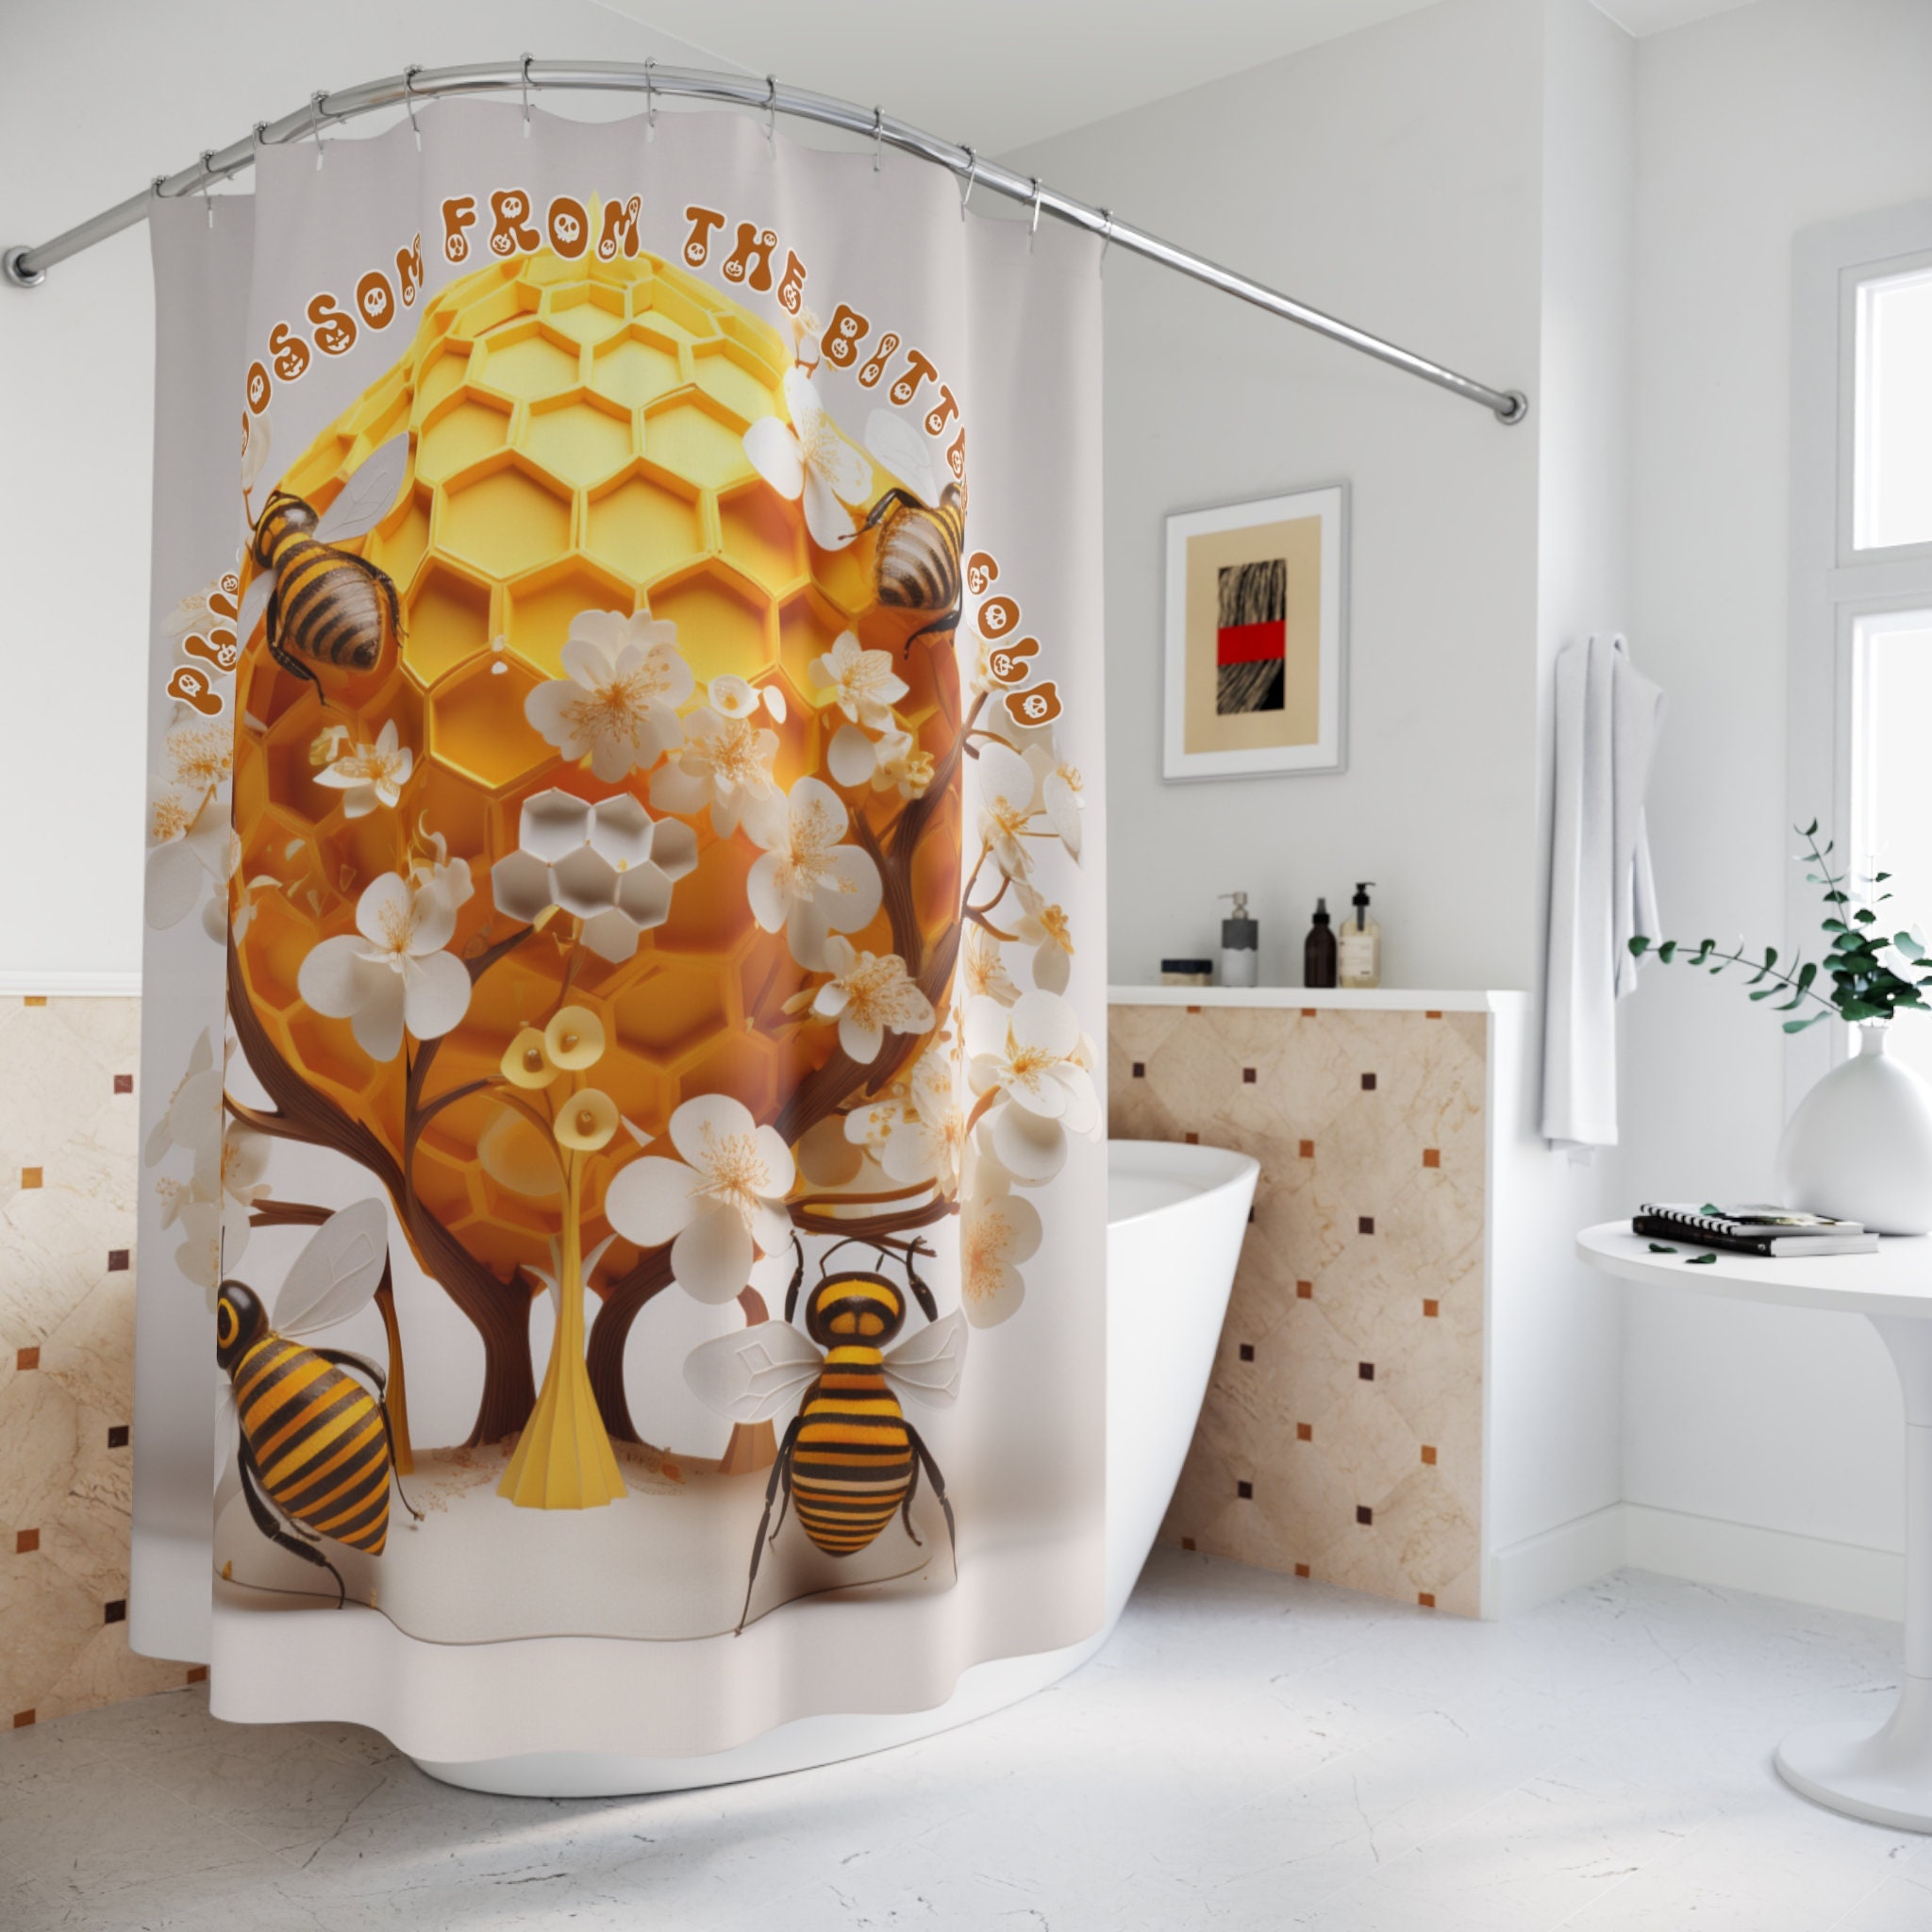 FuShvre Bee Shower Curtain Set with Rugs Honey Bee Bumble Bee Bathroom Mats Accessories Rustic Floral Spring Gardern Bath Decor Hooks Included